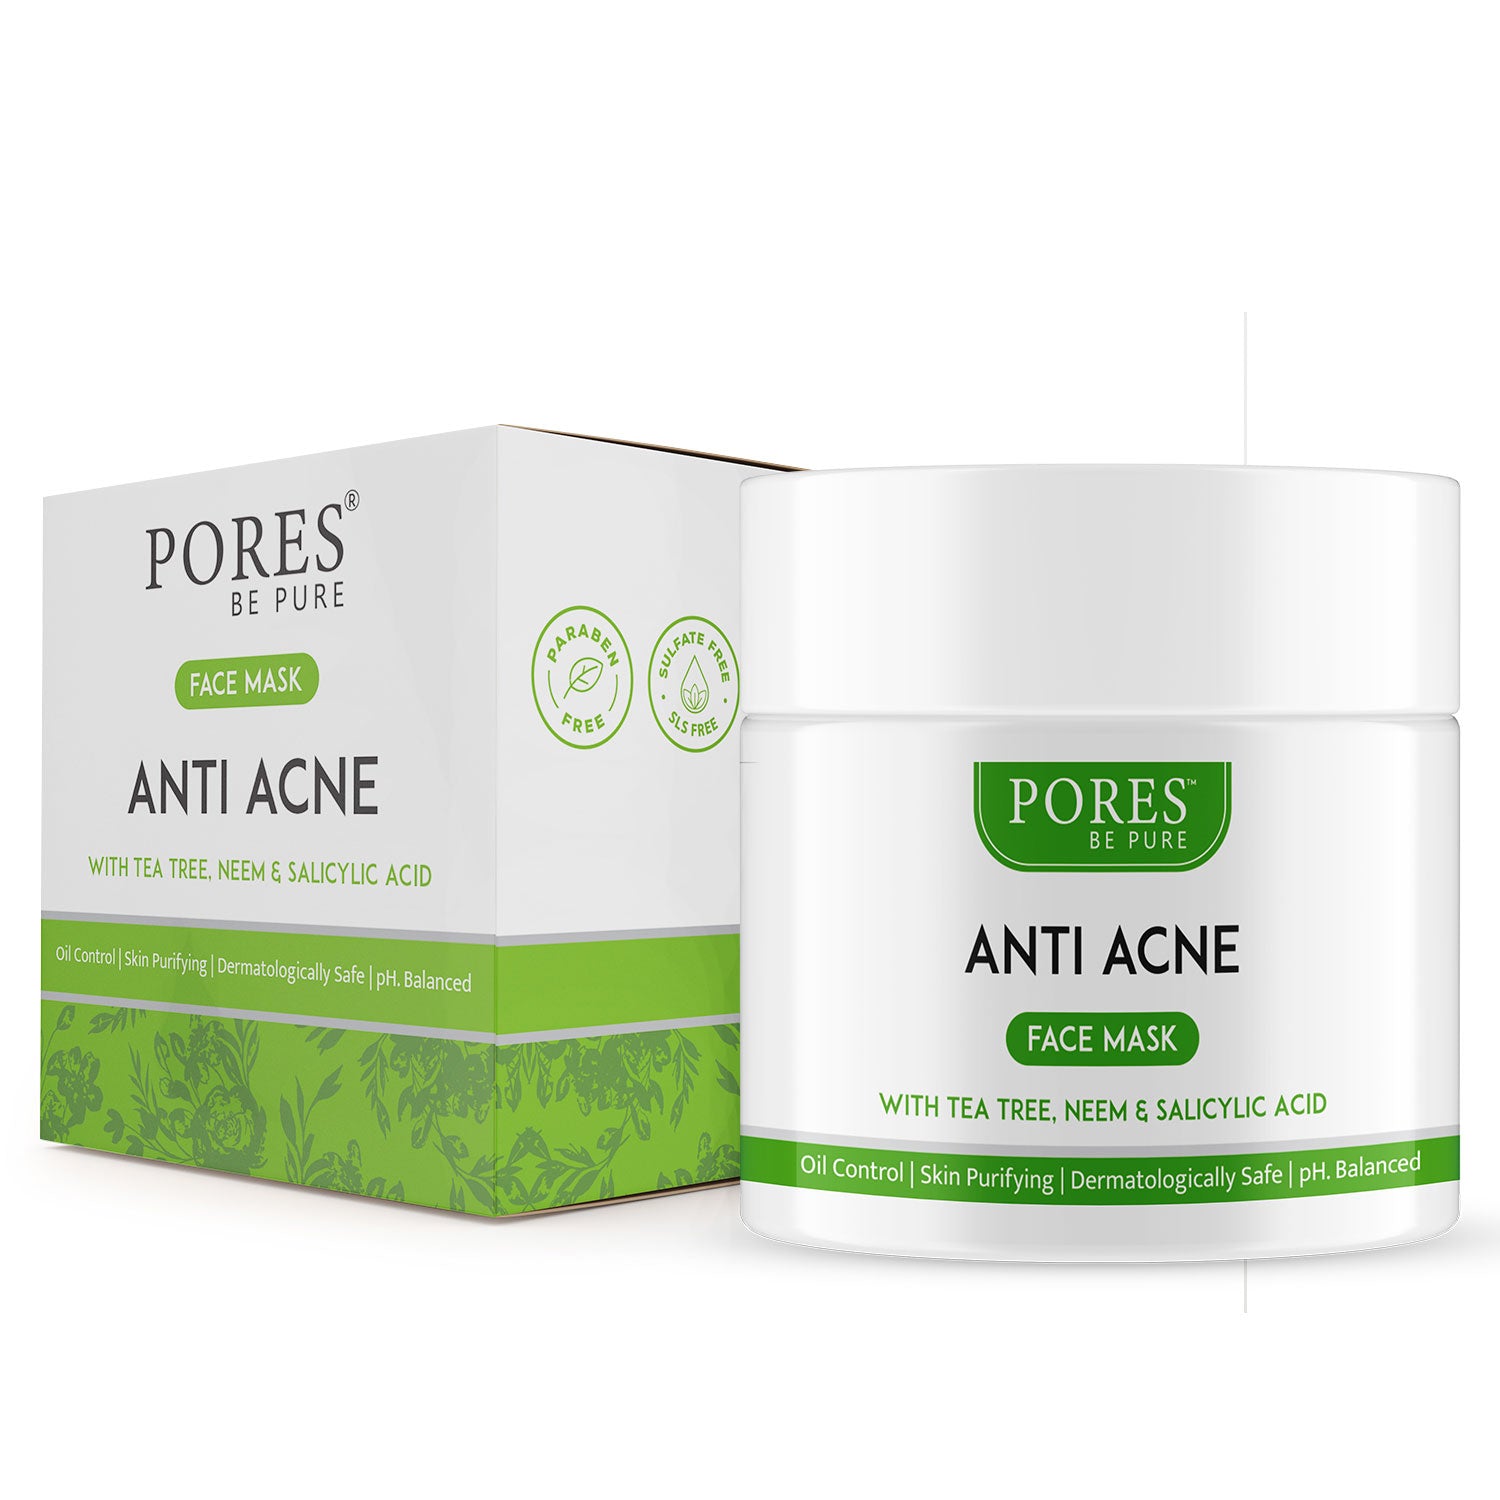 Anti Acne Face Mask by PORES BE PURE